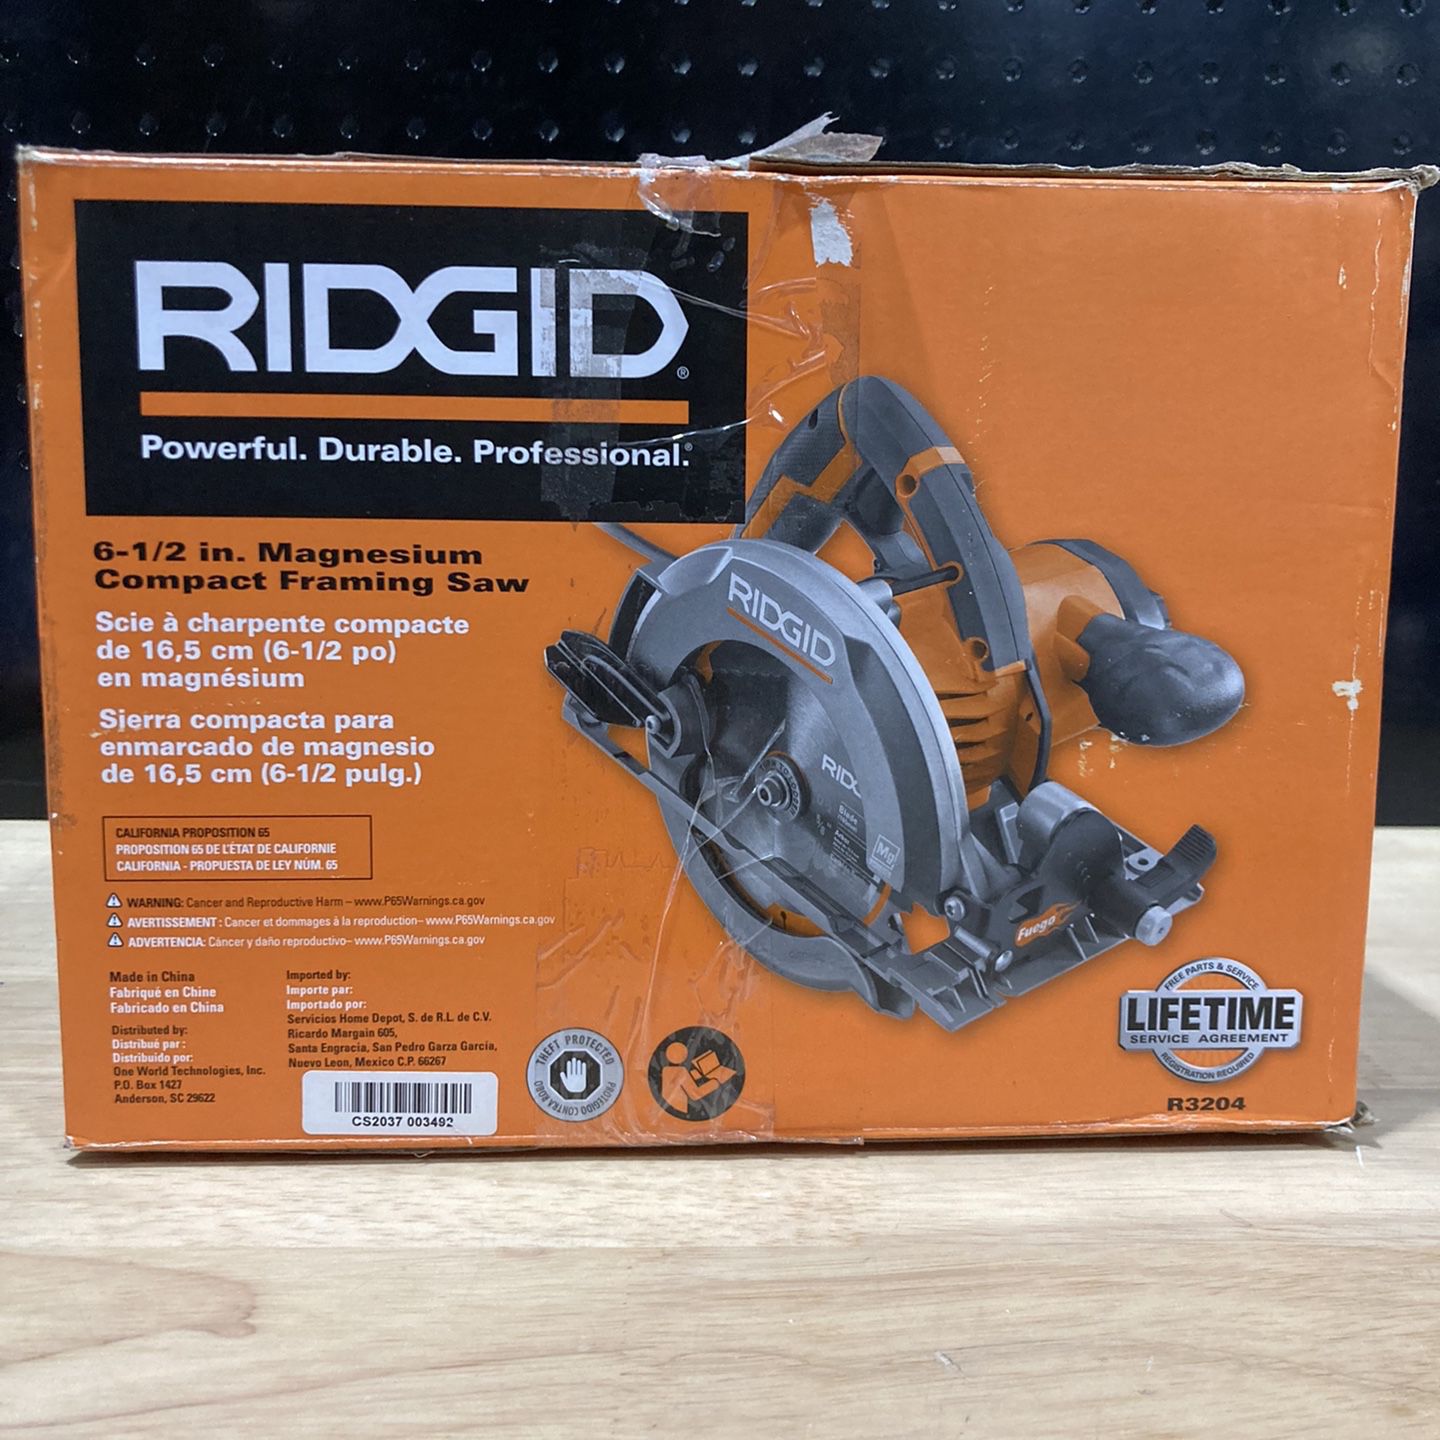 RIDGID 12 Amp Corded 6-1/2 in. Framing Circular Saw for Sale in Phoenix, AZ  OfferUp